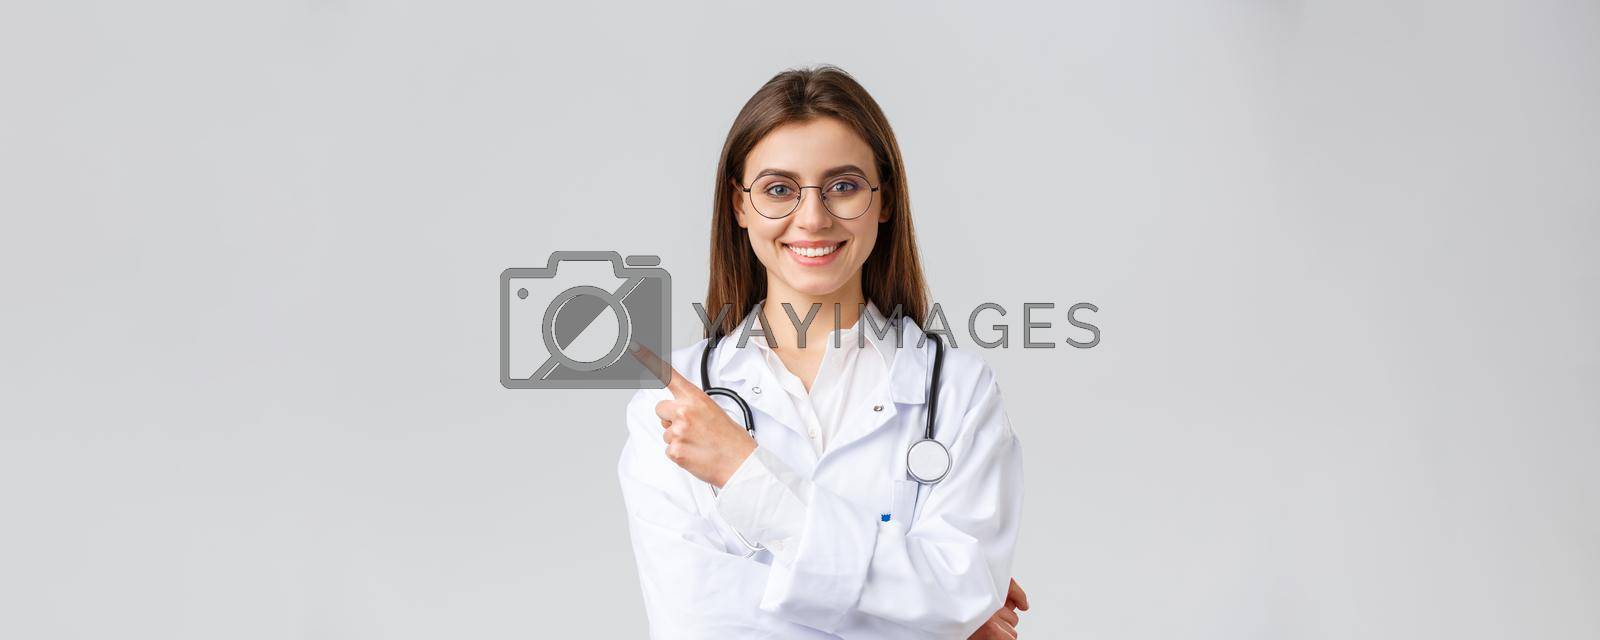 Healthcare workers, medicine and covid-19 pandemic concept. Good-looking professional female doctor in white scrubs and glasses, pointing fingers left, smiling friendly, showing information.